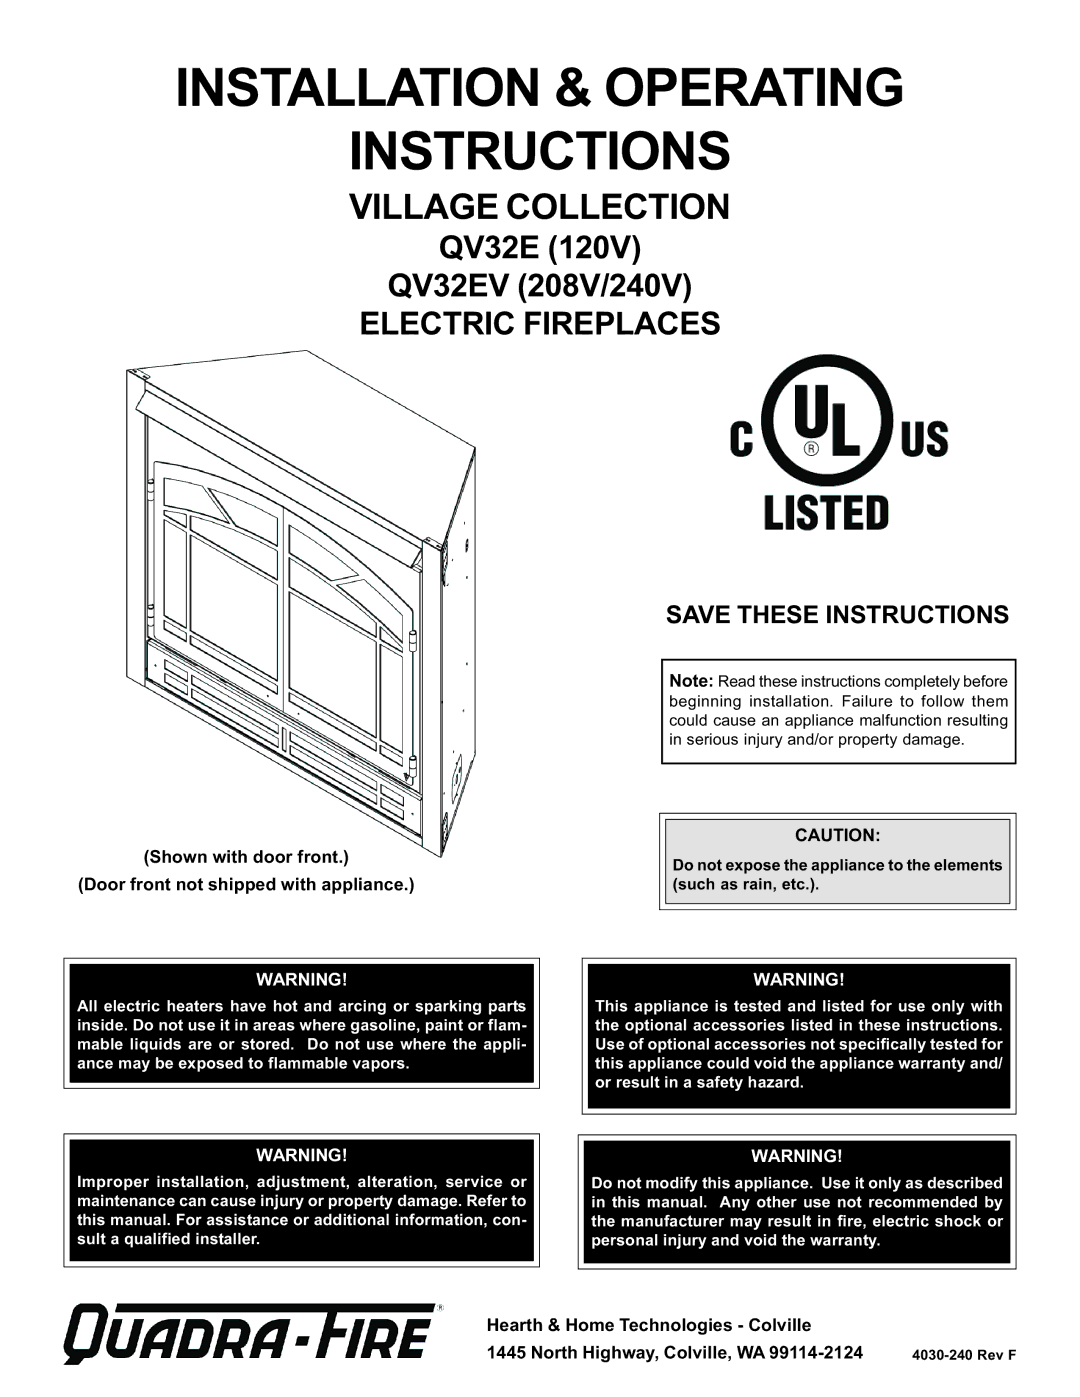 Hearth and Home Technologies QV32E (120V) warranty Installation & Operating Instructions, Electric Fireplaces 